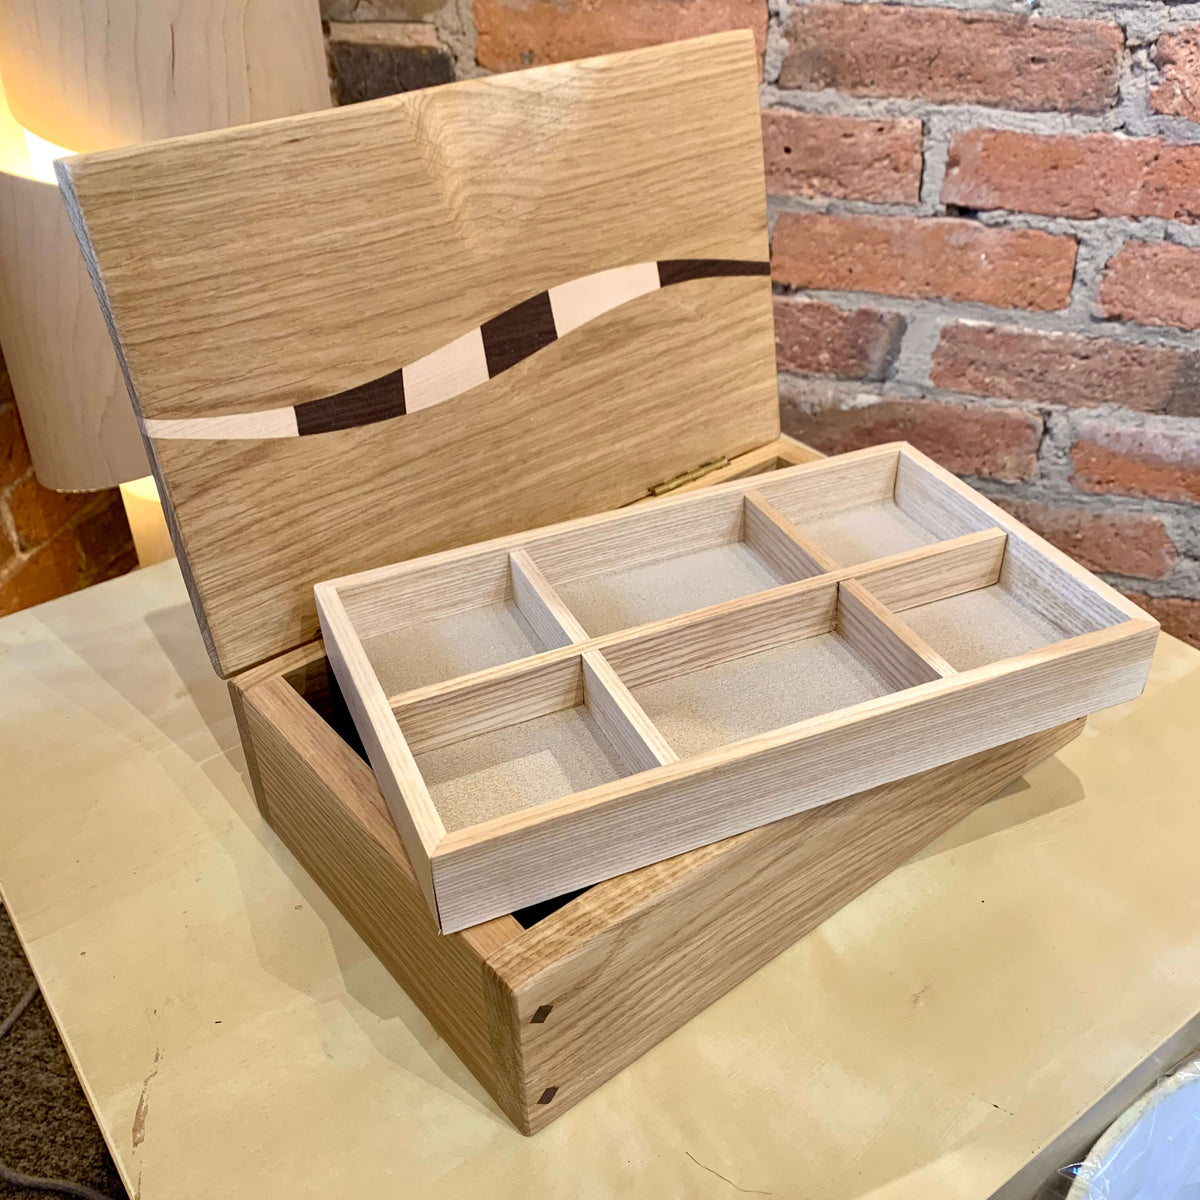 Handmade wooden jewellery box with multiple compartments, available at Ferrers Gallery.